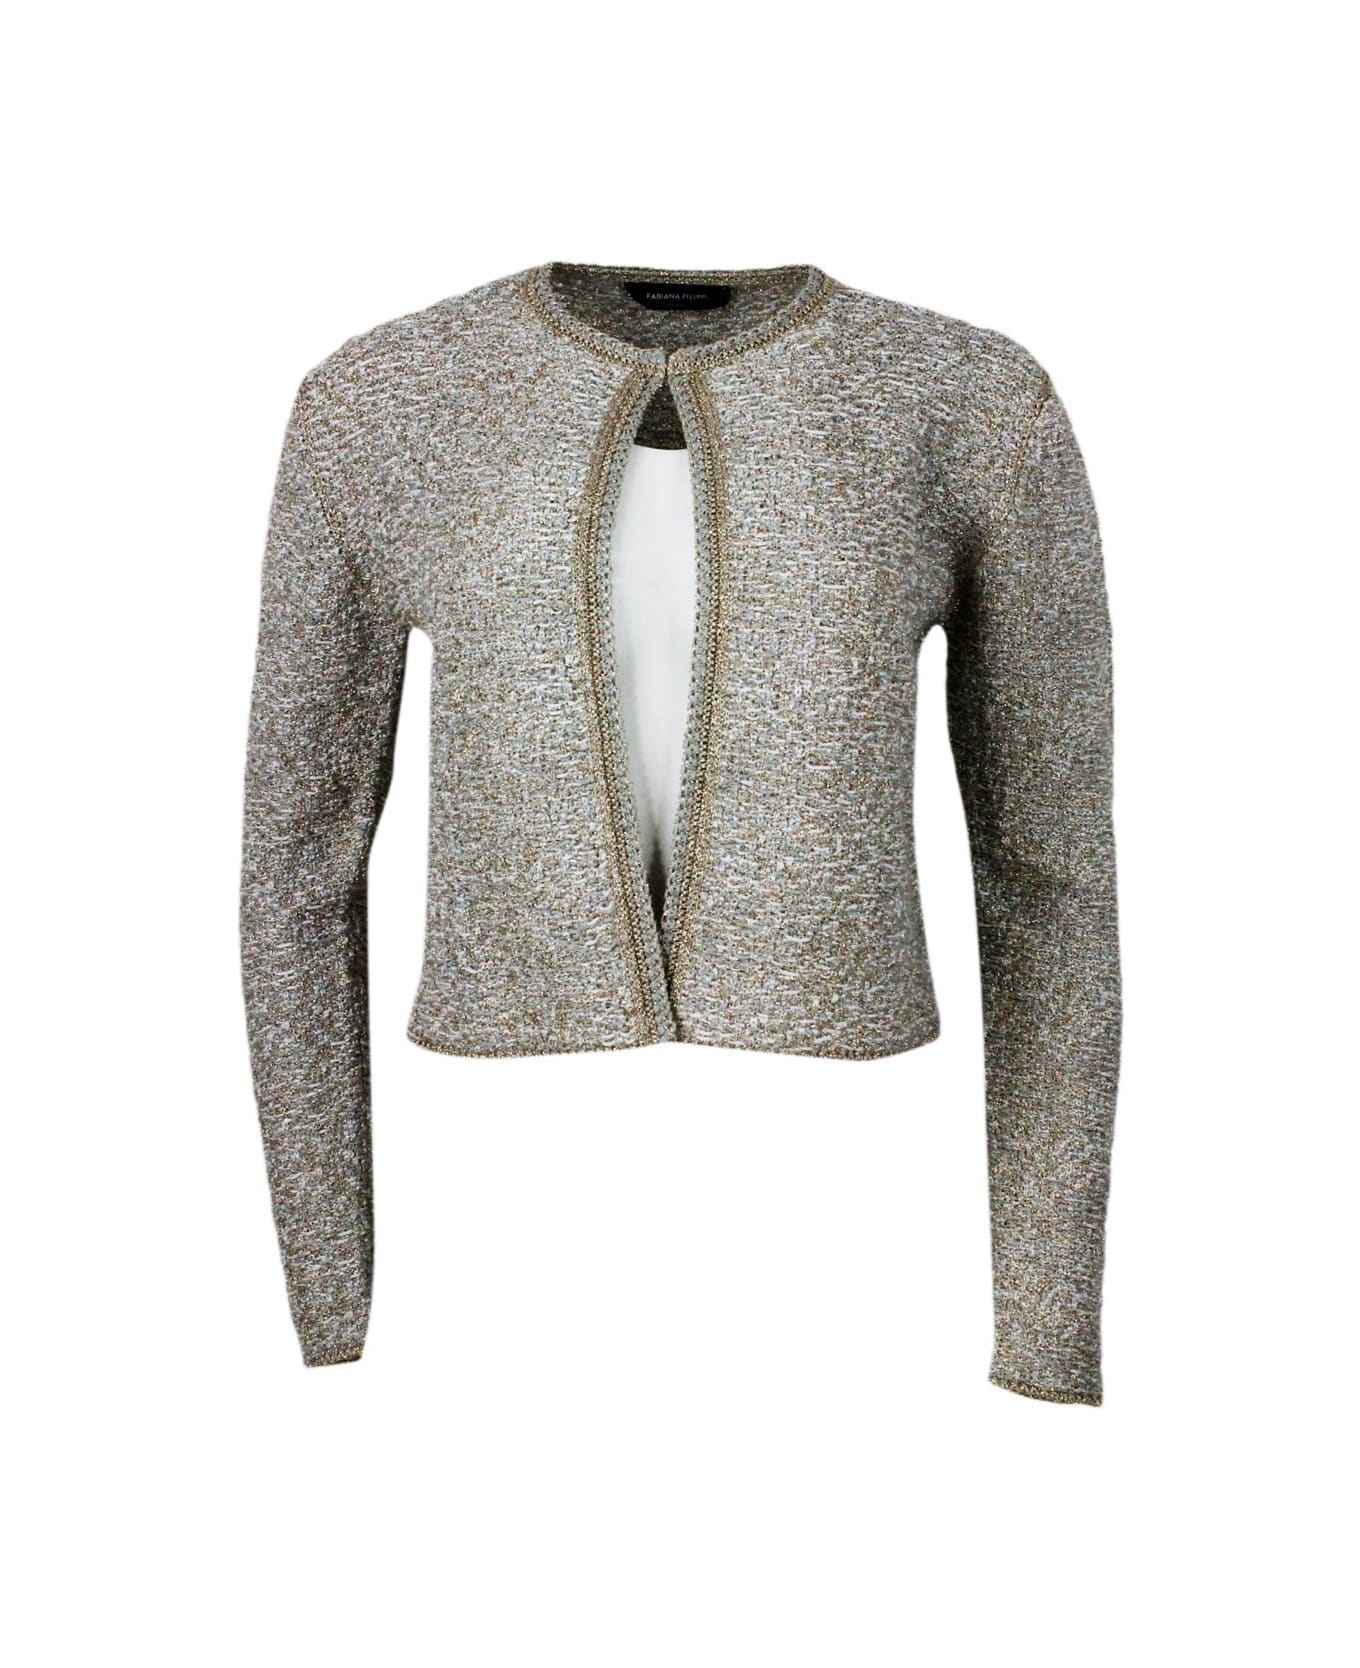 Fabiana Filippi Chanel-style Jacket Sweater Open On The Front And With Hook Closure Embellished With Bright Lurex Threads - Grigio chiaro/bianco/oro